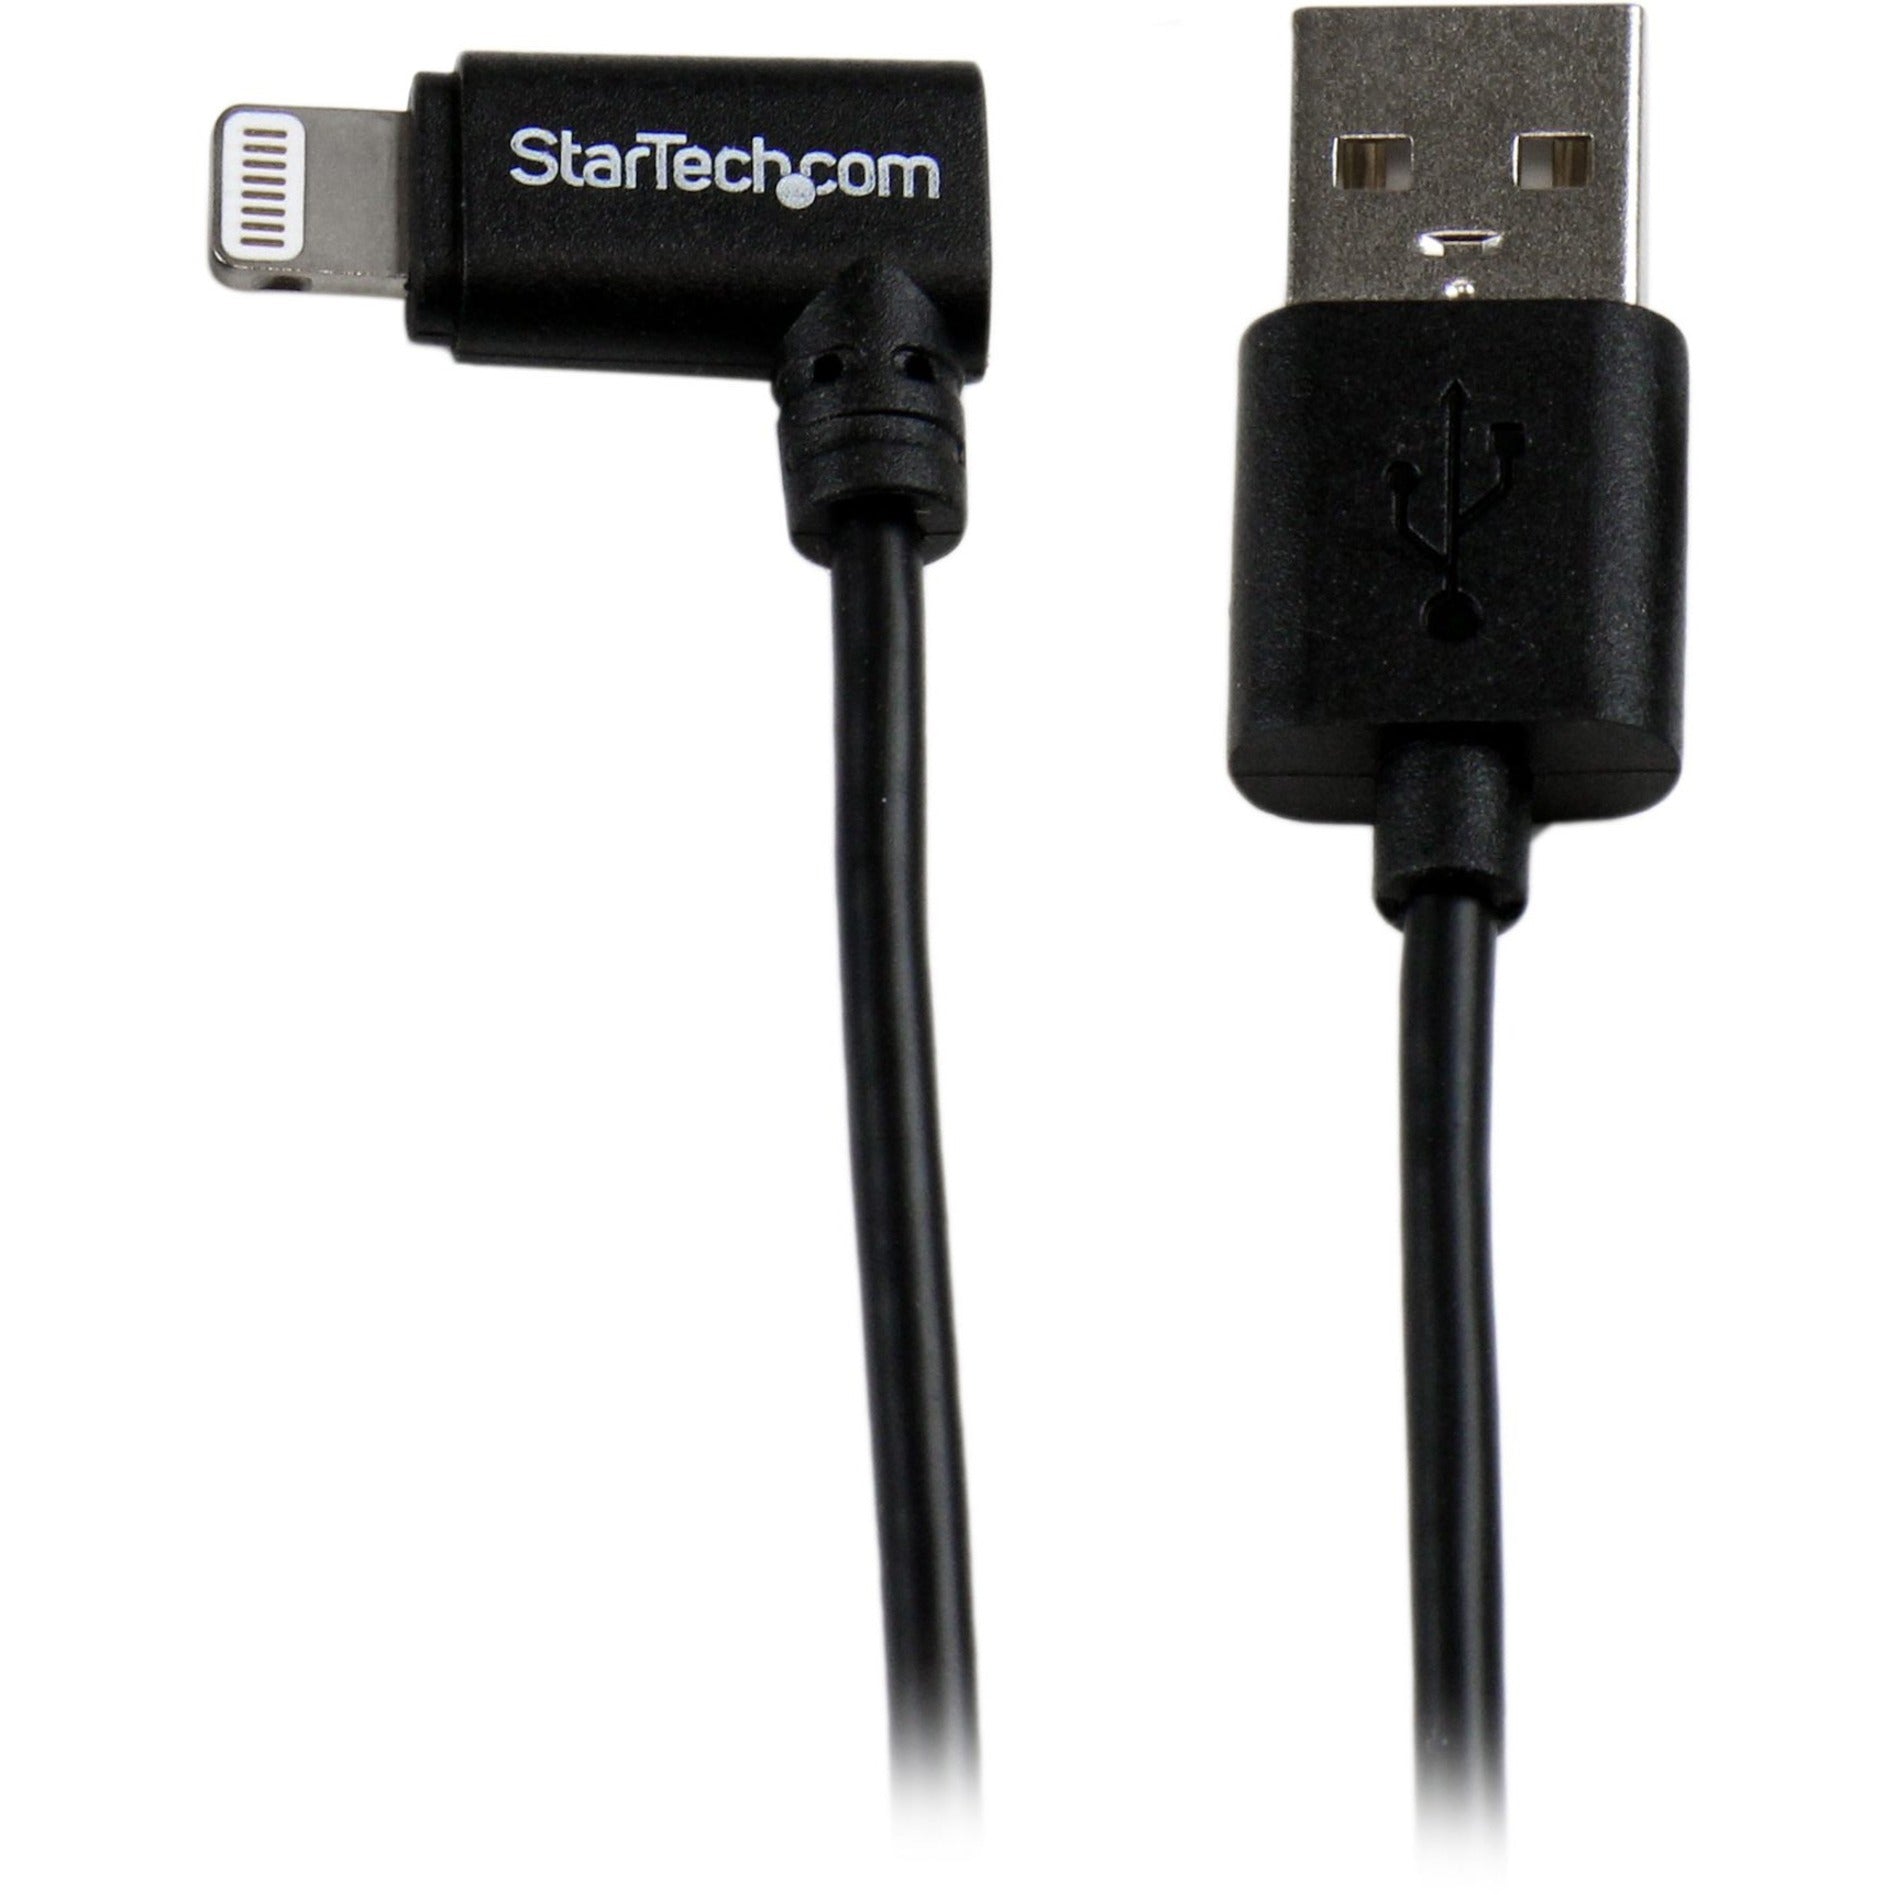 StarTech.com USBLT2MBR Lightning/USB Data Transfer Cable, 6ft Angled Black Apple 8-pin Lightning Connector to USB Cable for iPhone / iPod / iPad